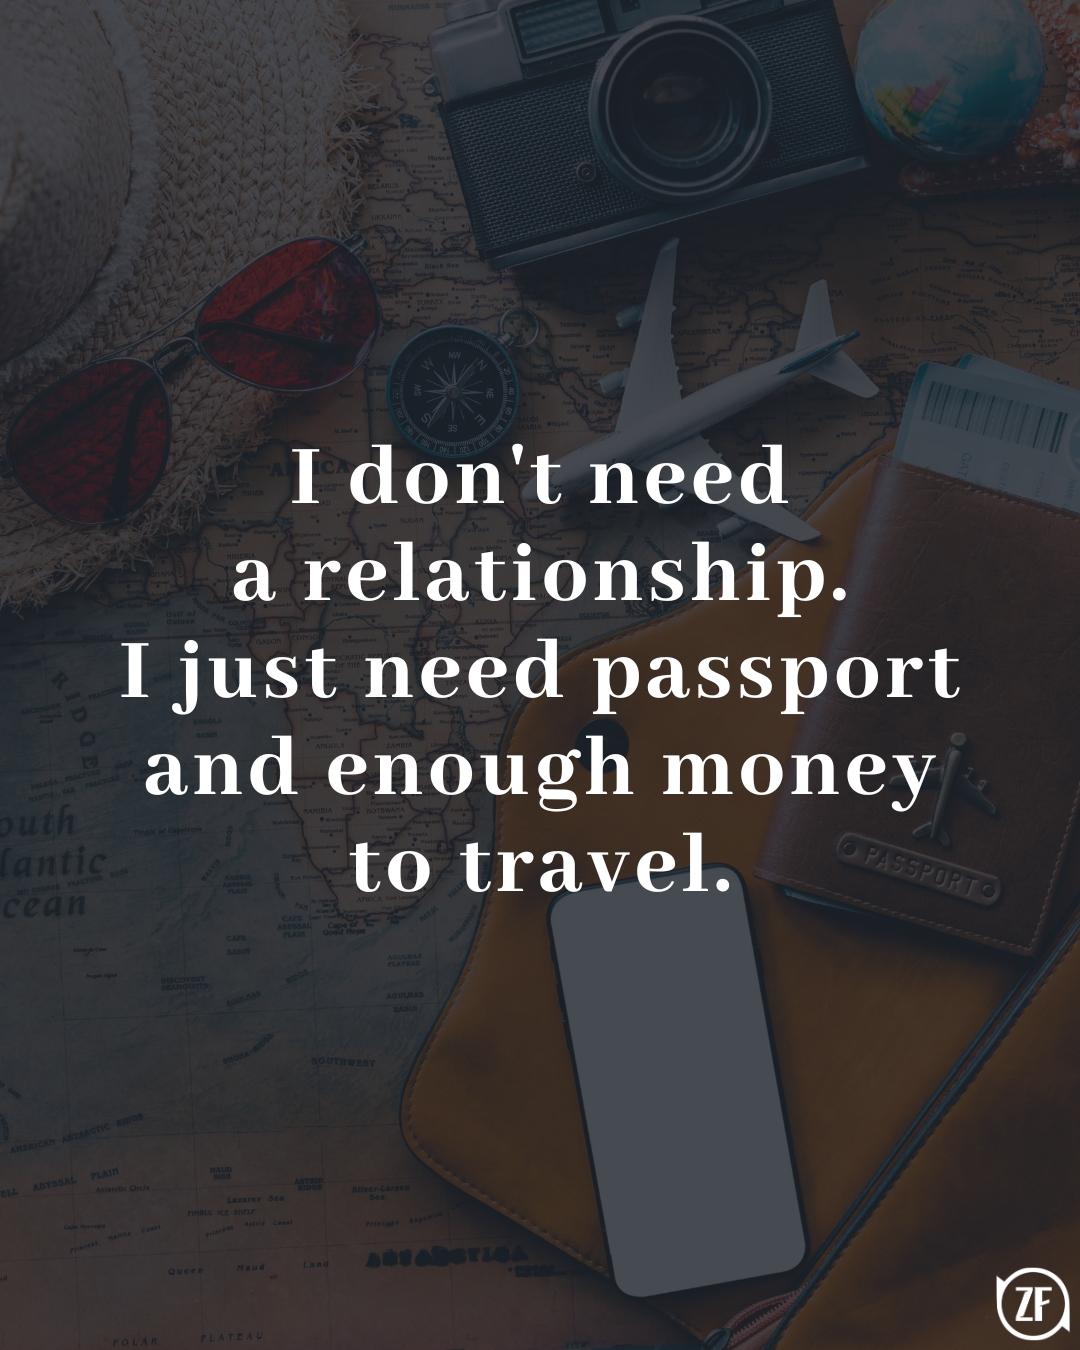 I don't need a relationship. I just need passport and enough money to travel.